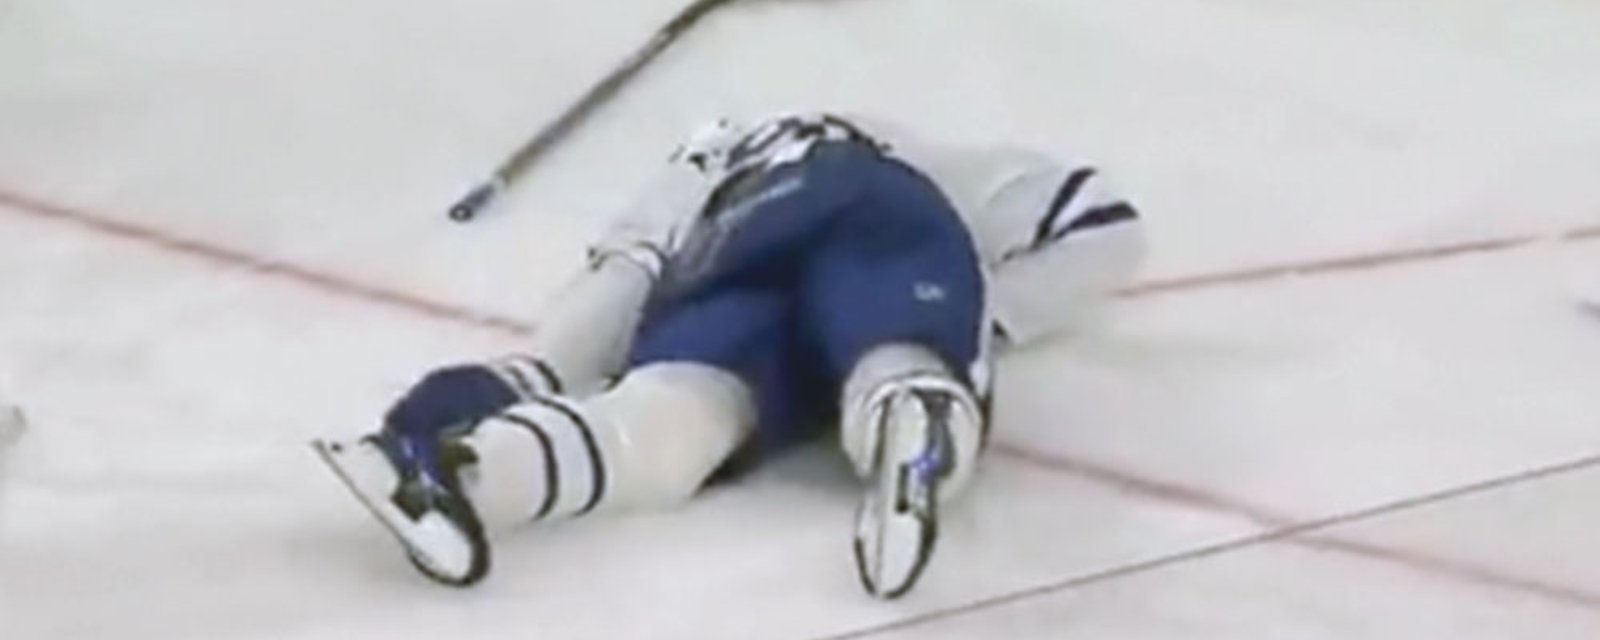 Tavares gets blasted by a slap shot, leaves the game with injury